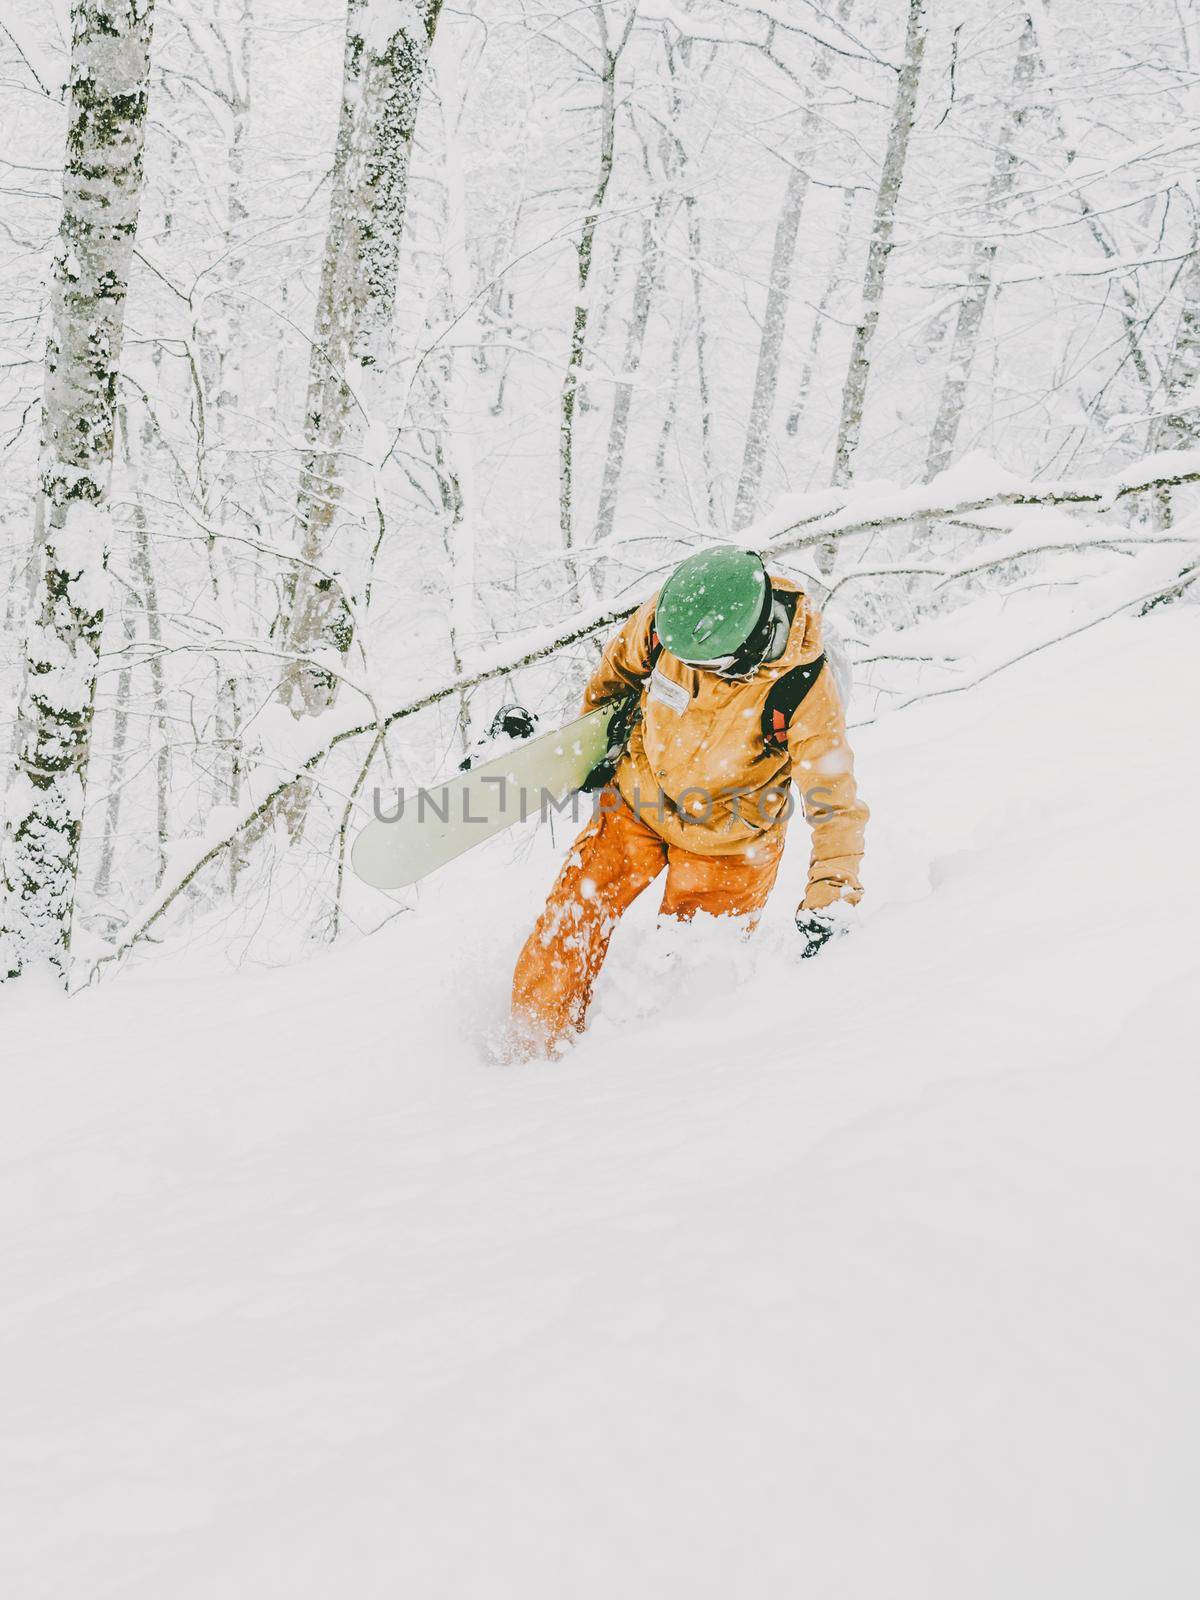 Snowboarder freerider young man walking in winter forest after snowfall